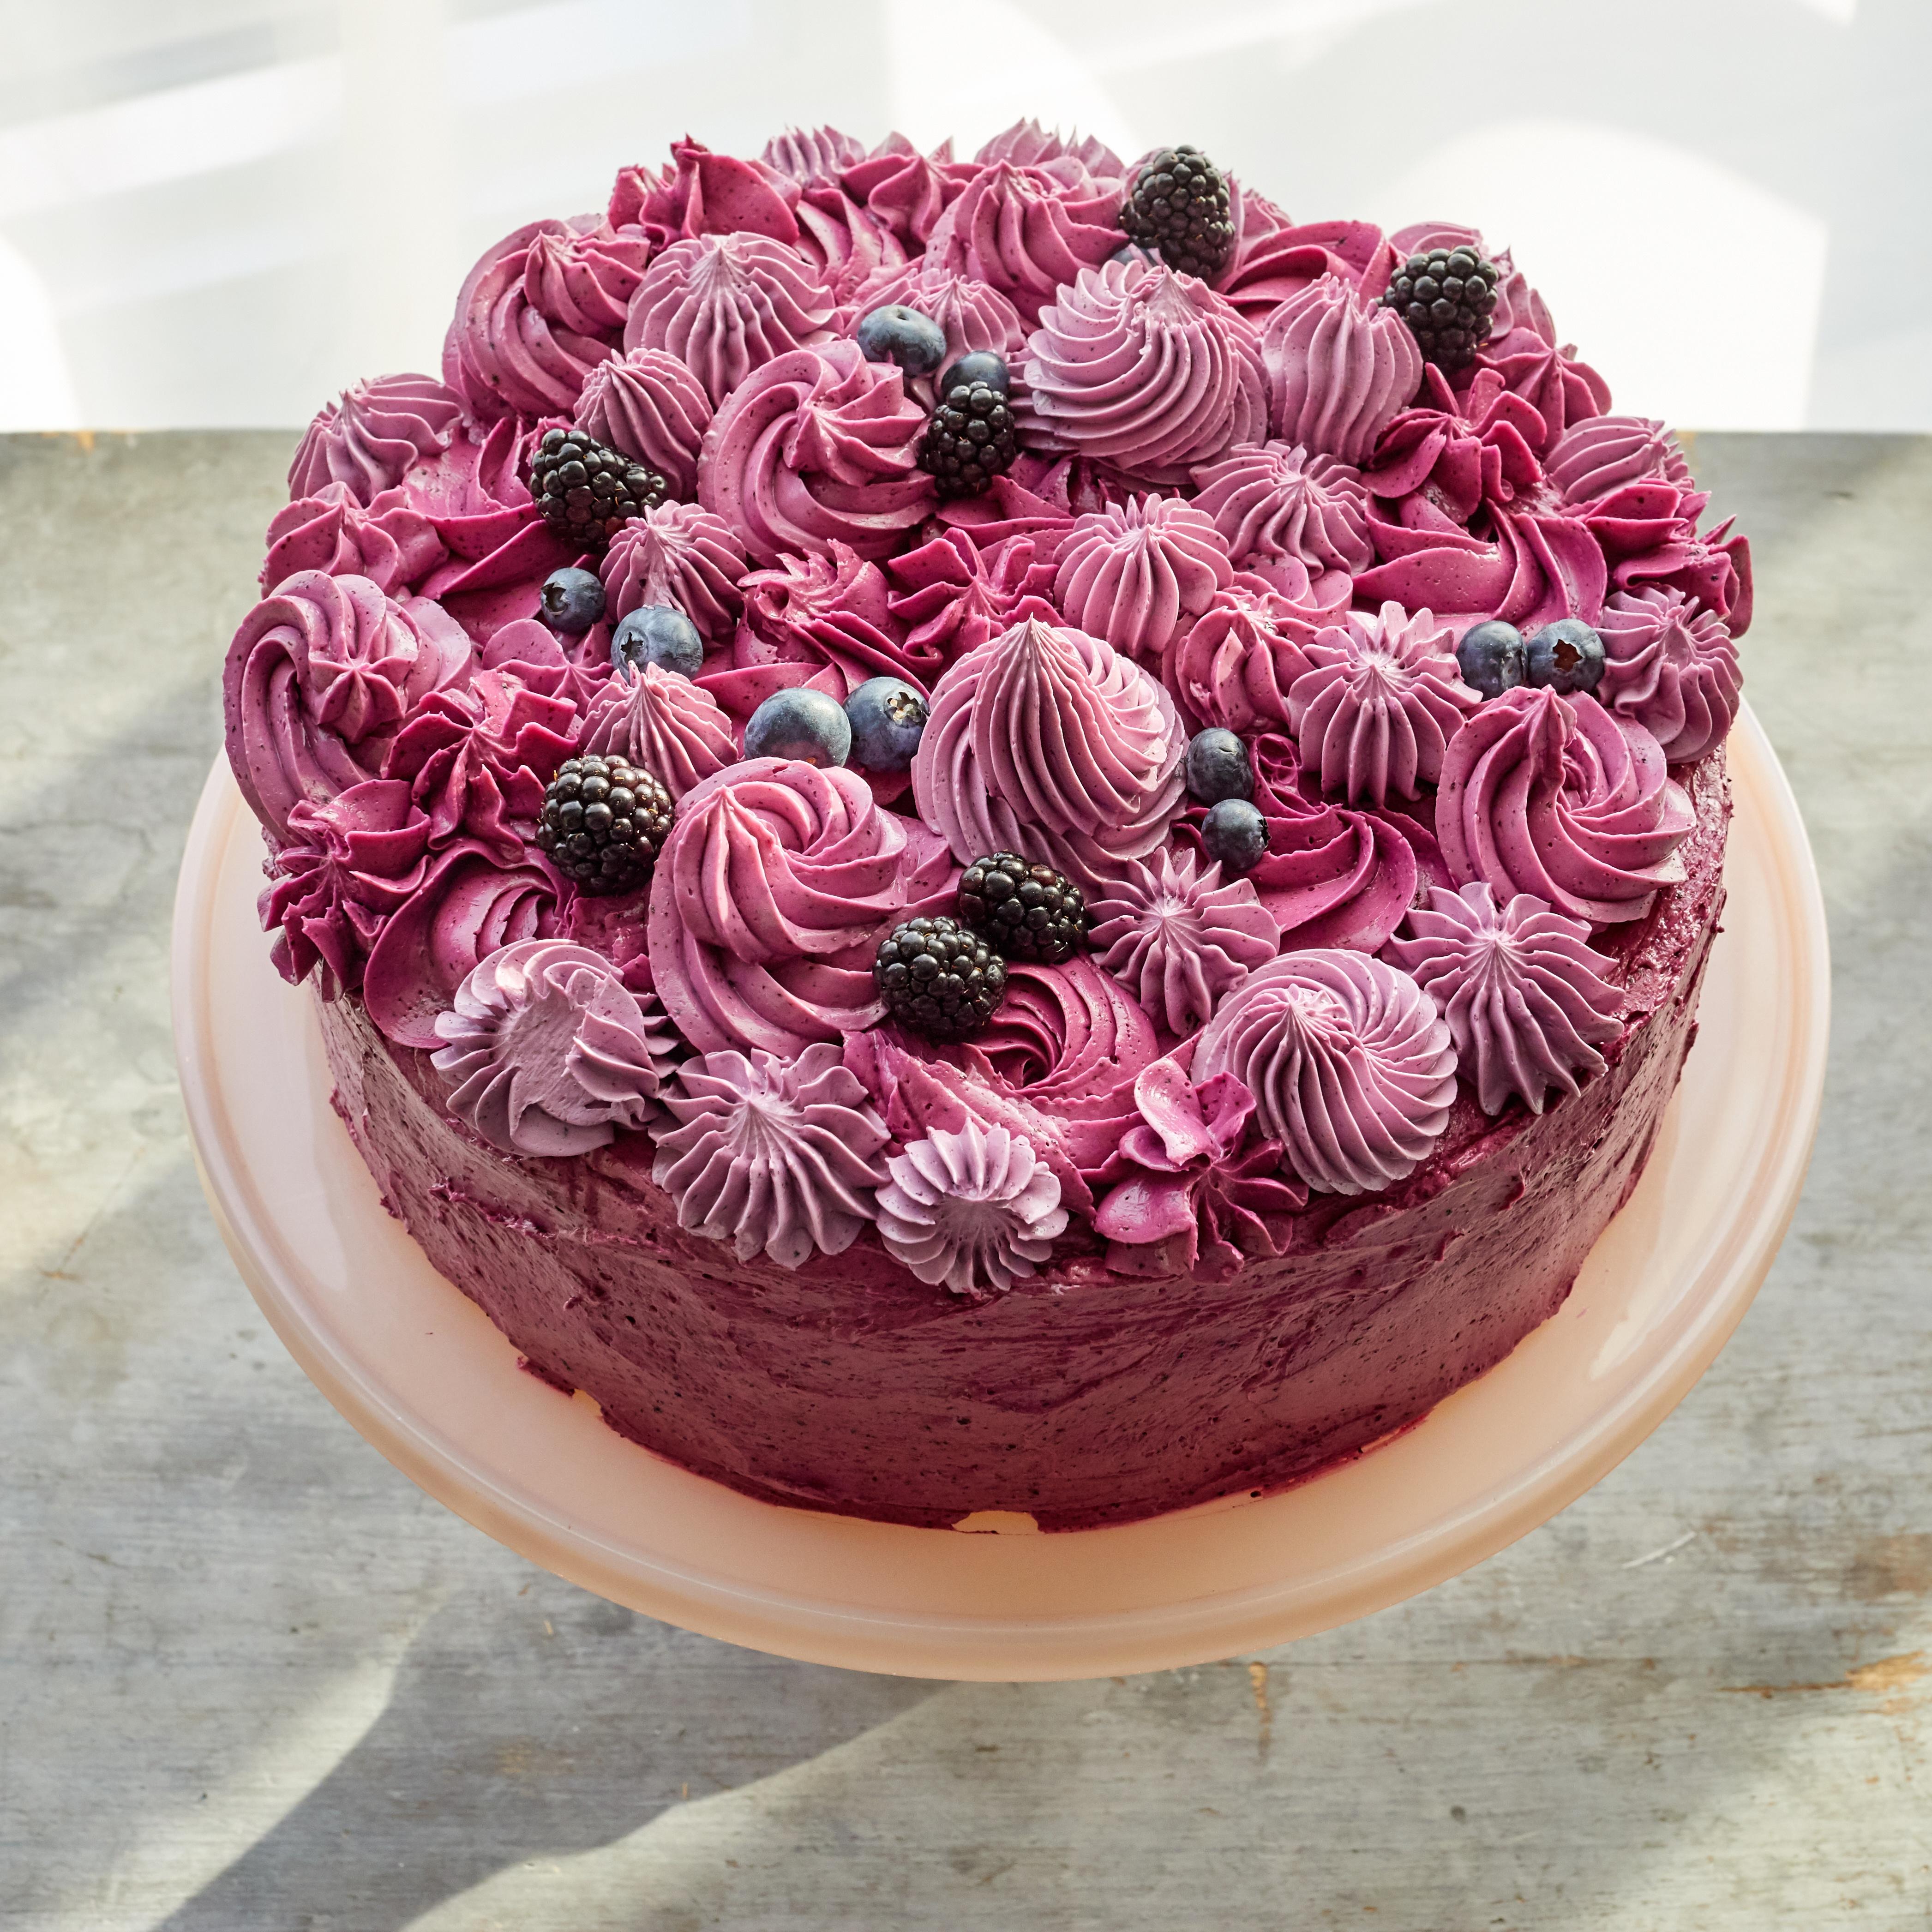 Chantilly Cake Recipe: How to Make Berry Chantilly Cake